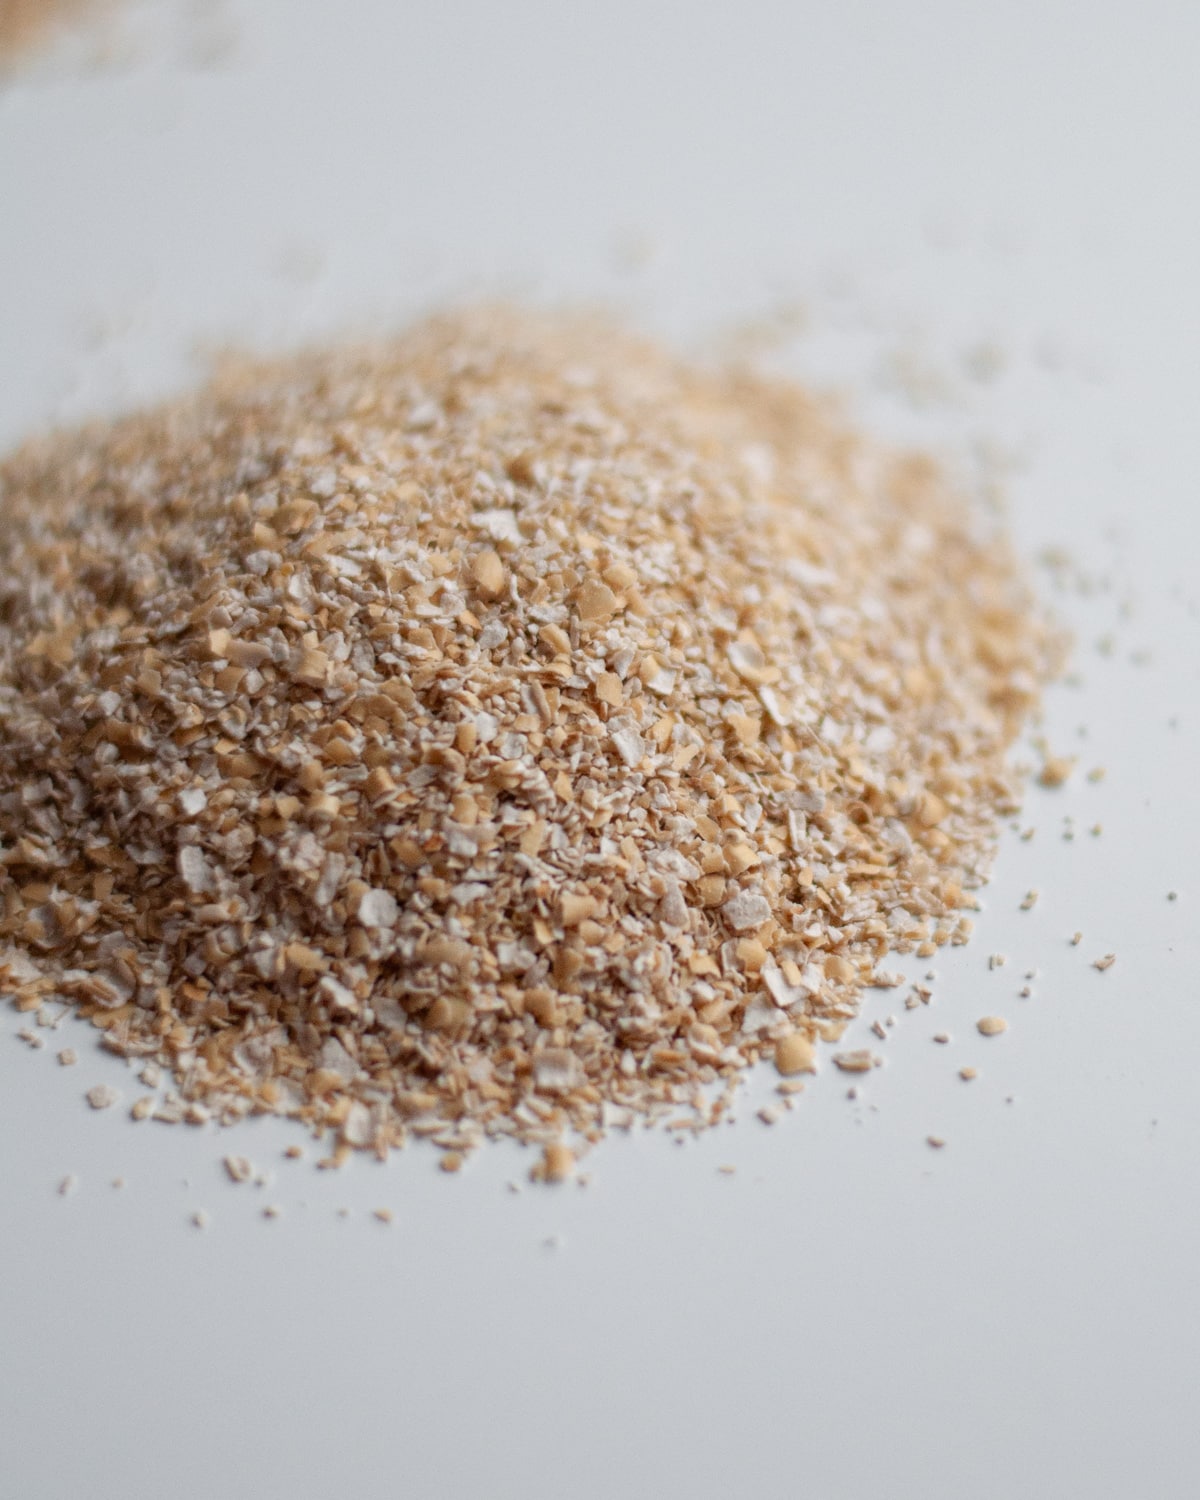 Close up of a pile of oat bran to show the shape and texture of the grain.